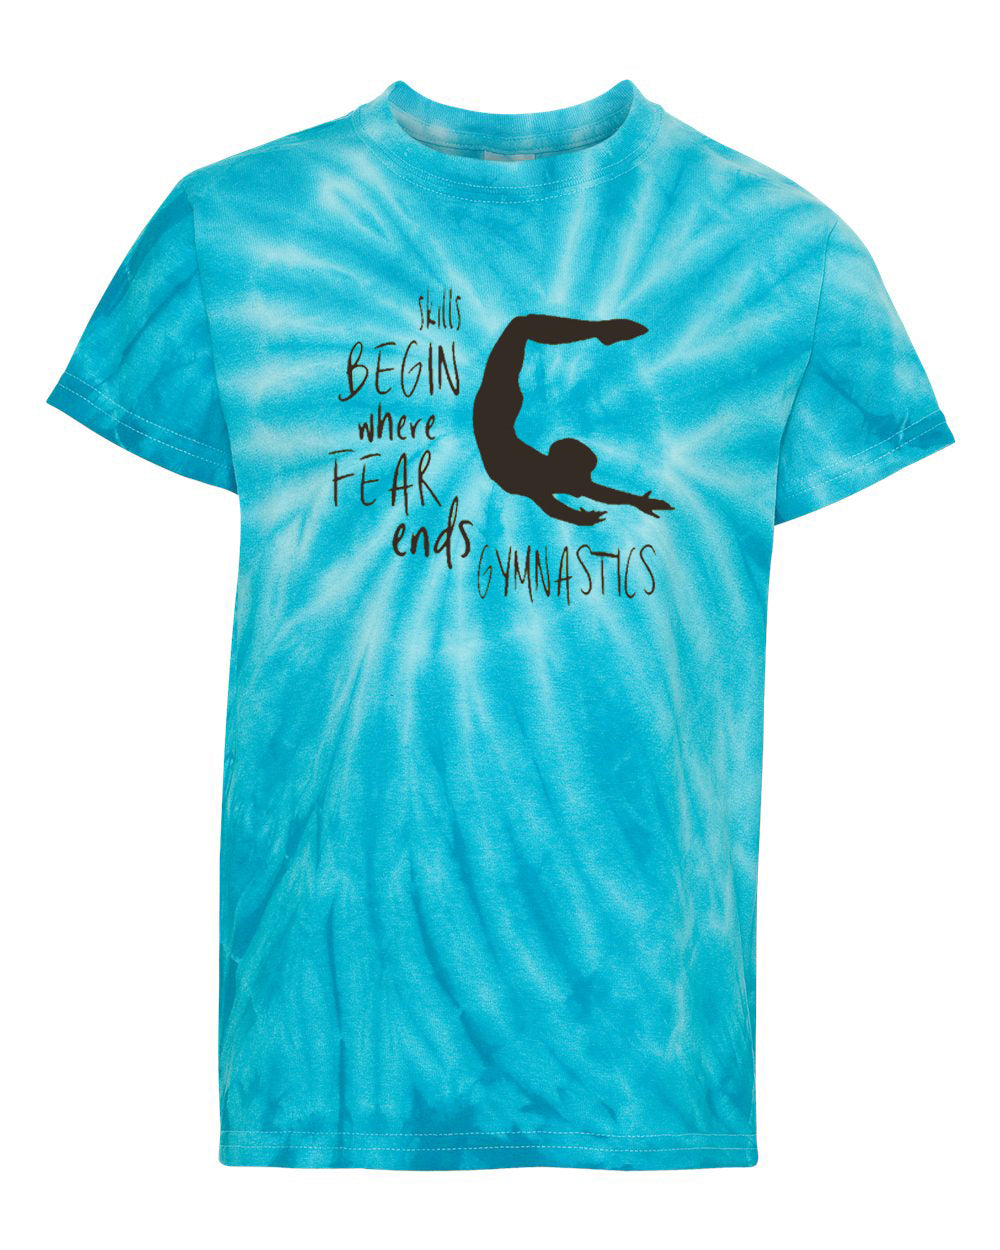 Skills Begin Where Fear Ends Youth T-Shirt Turquoise